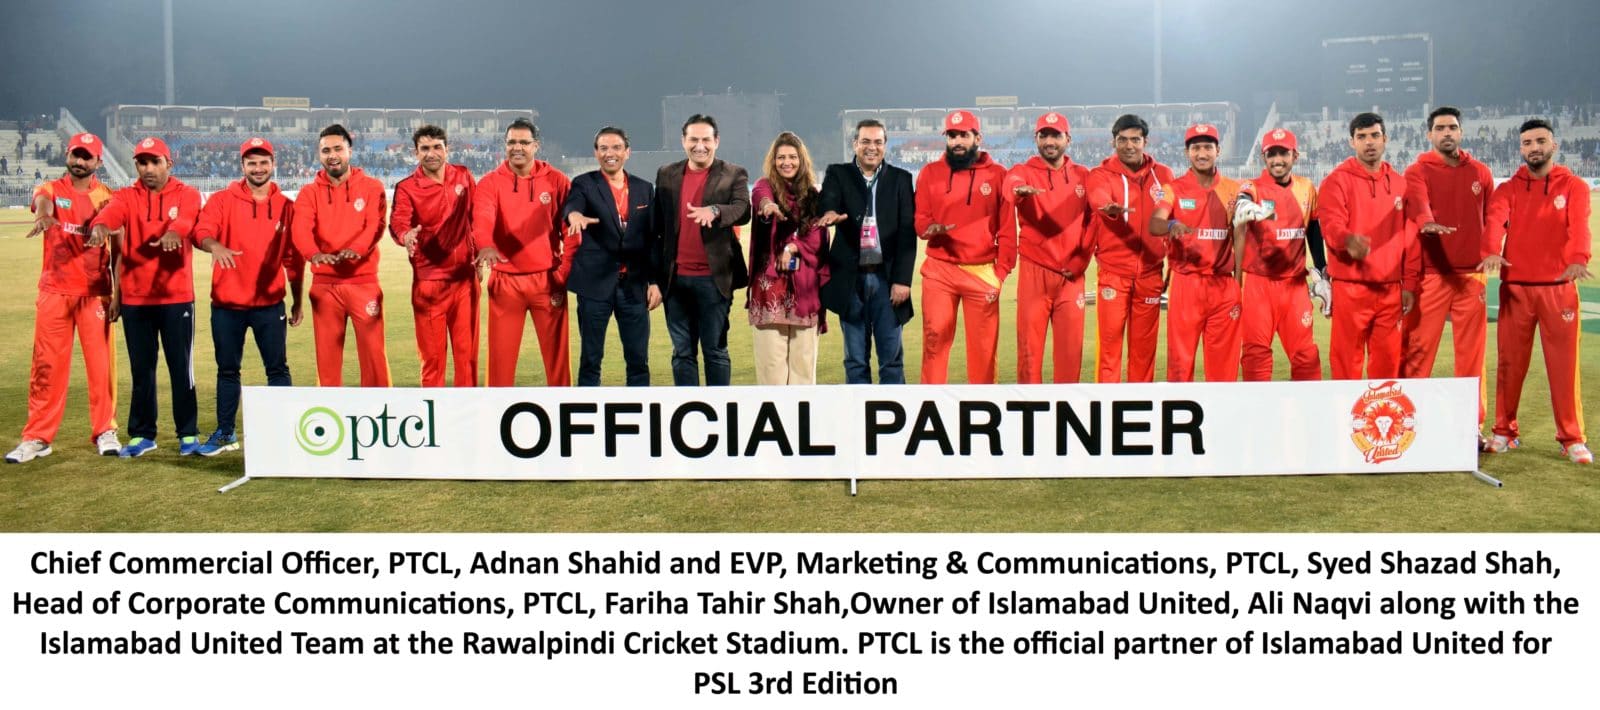 PTCL Official Partner of Islamabad United Group Photo